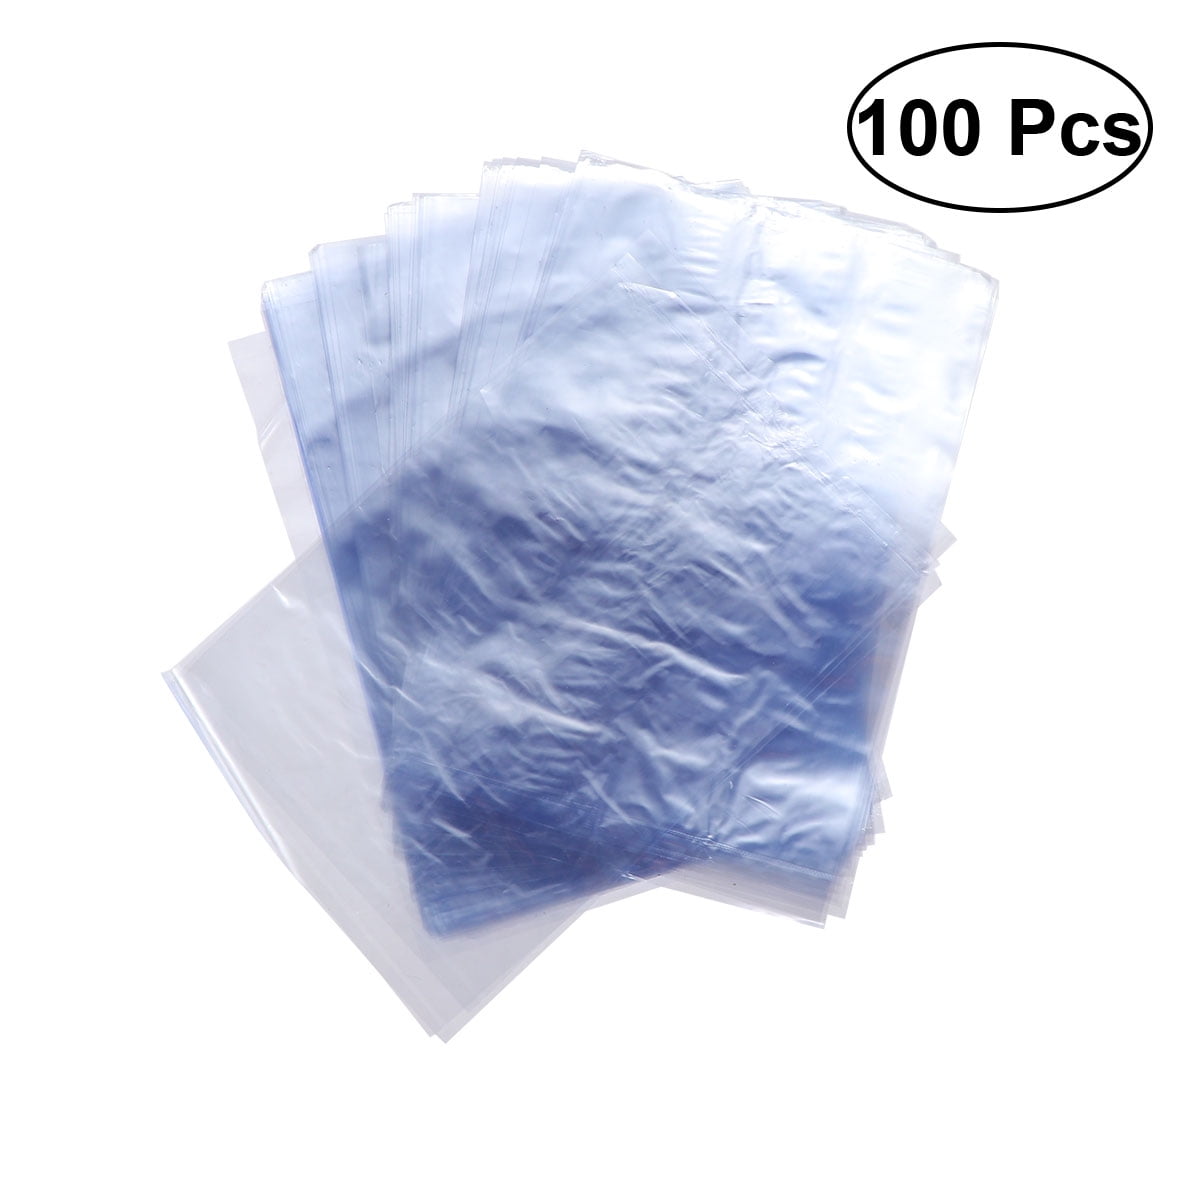 Bath Bombs 200 Bottles Transparent Shrink Wrap Bags Heat Seal Film Bag for Soaps Crafts Jars and Small Gifts 200 pcs 4 X 6 Inch Shrink Bags